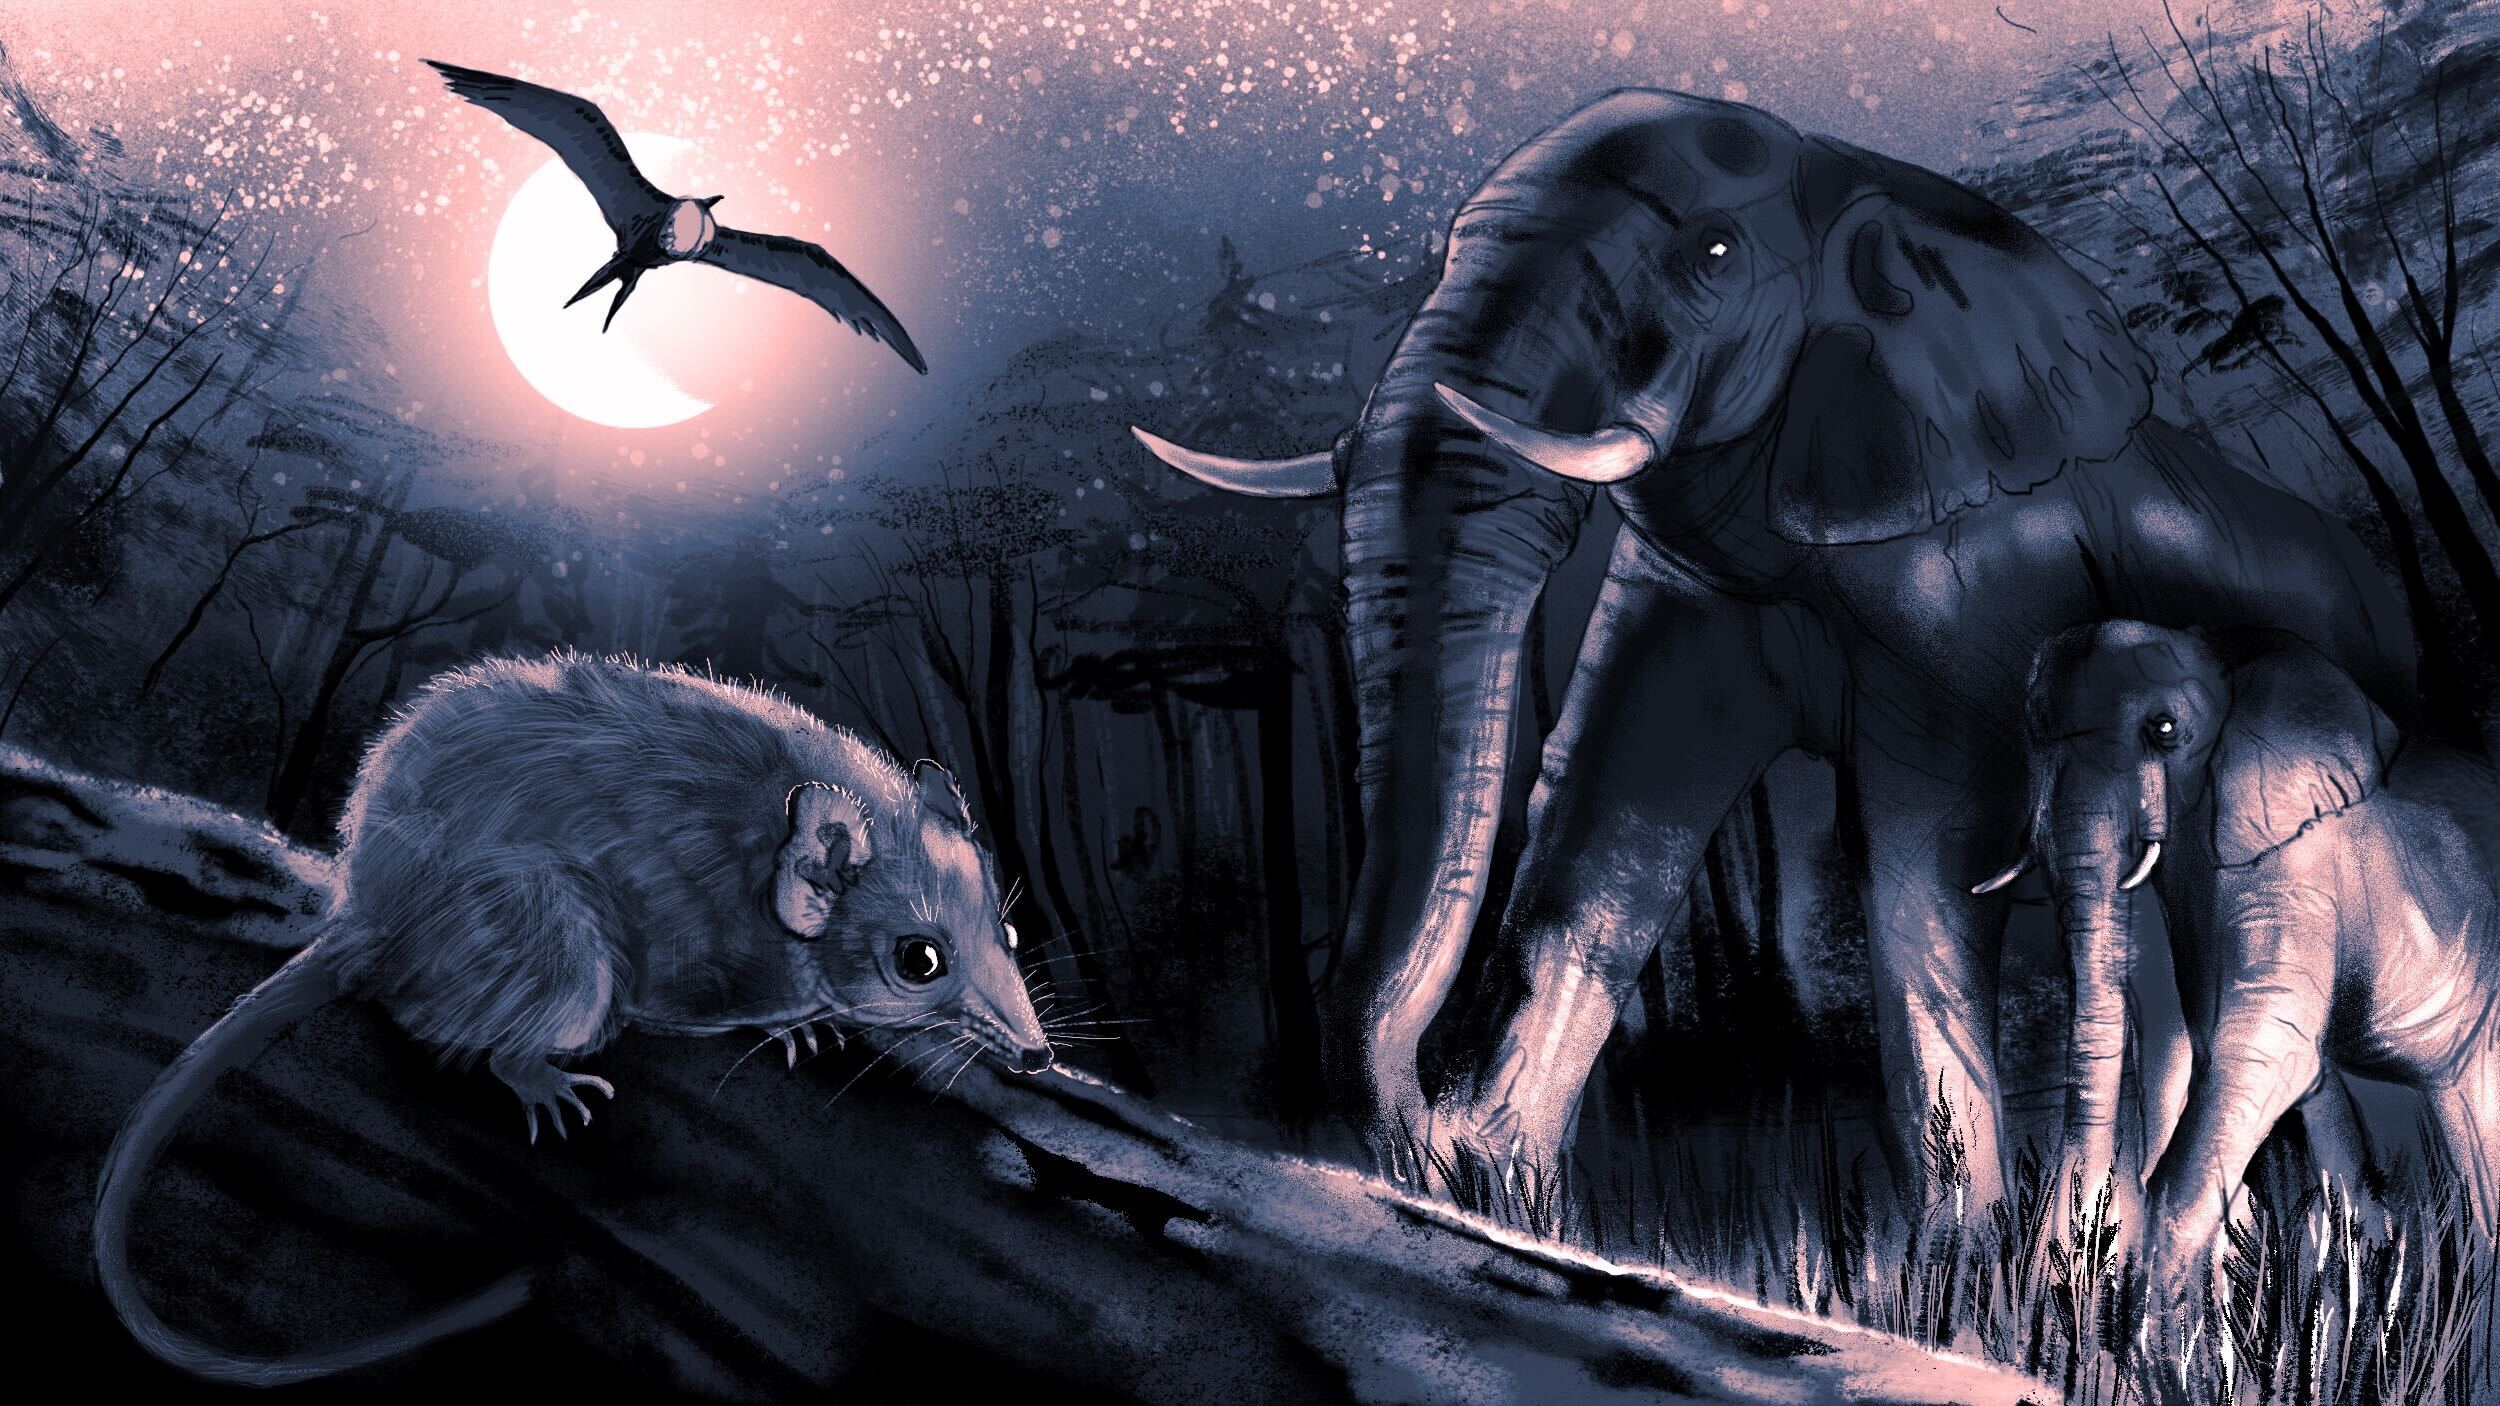 Illustration of a prehistoric scene with a rodent-like mammal, possibly experiencing animal sleep deprivation, perched on a branch. In the background, two elephants are walking while a flying reptile soars under the moonlit sky.